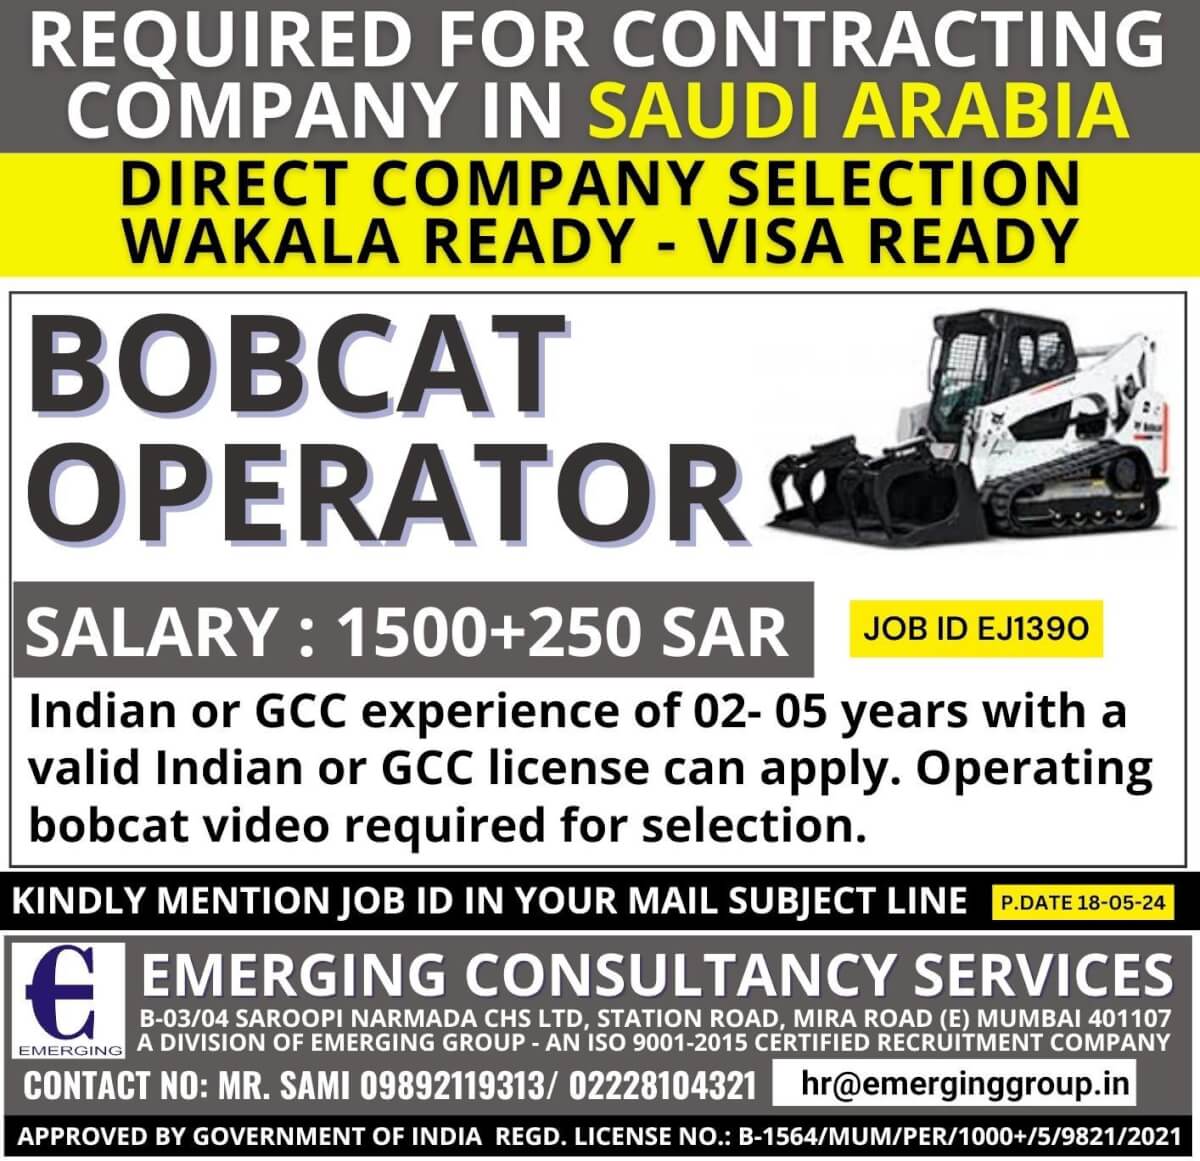 REQUIRED FOR CONTRACTING COMAPNY IN SAUDI ARABIA - WAKALA READY - VISA READY